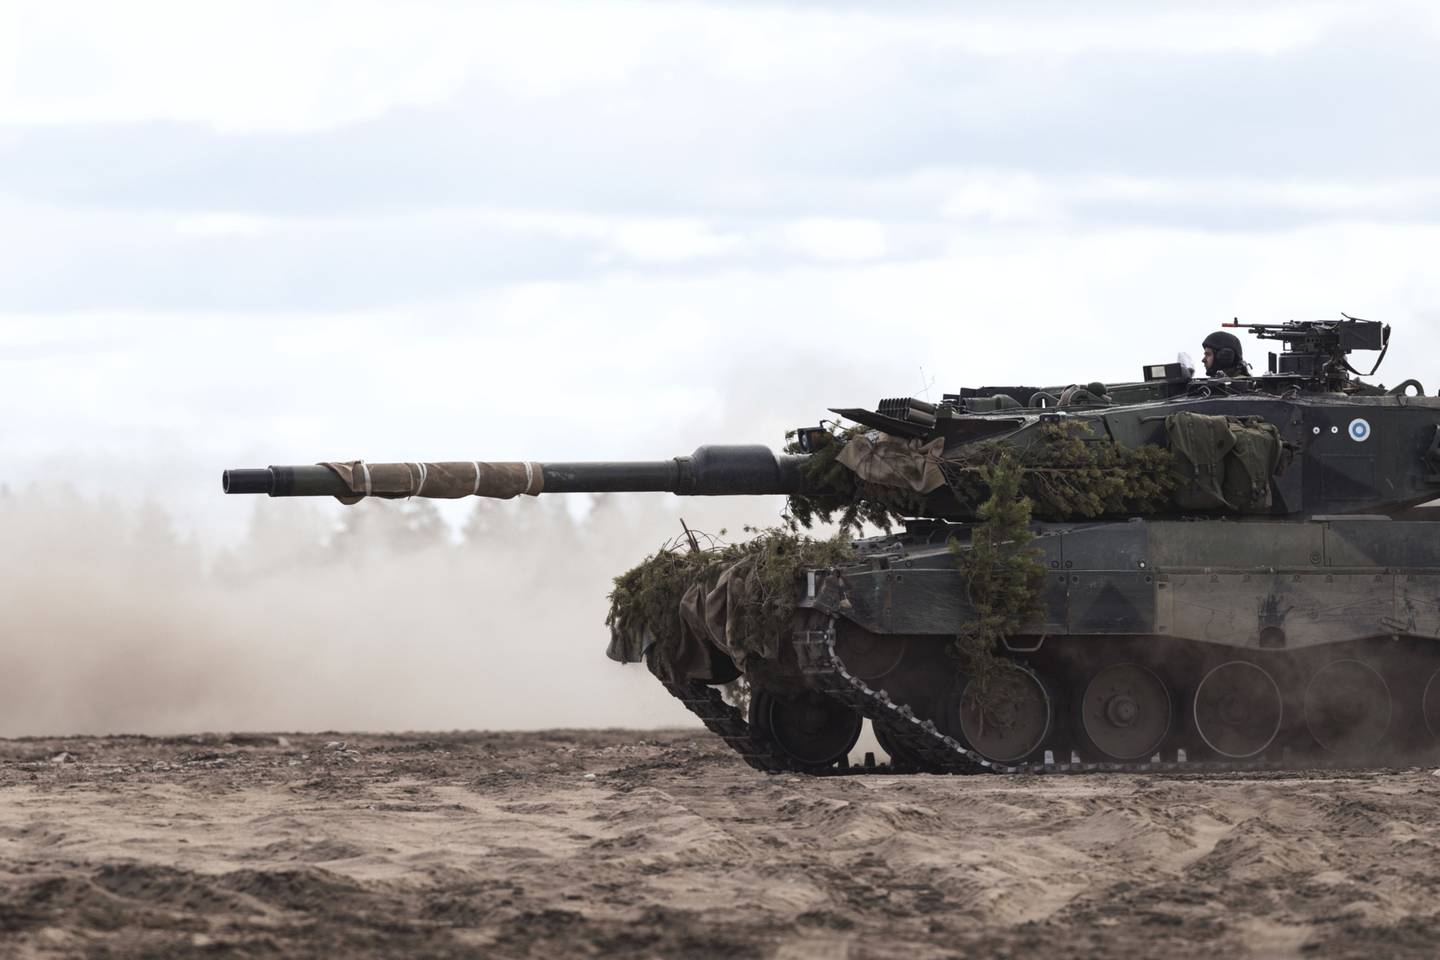 A Leopard 2 A6 battle tank during a training exercise in Niinisalo, Finland. Bloomberg